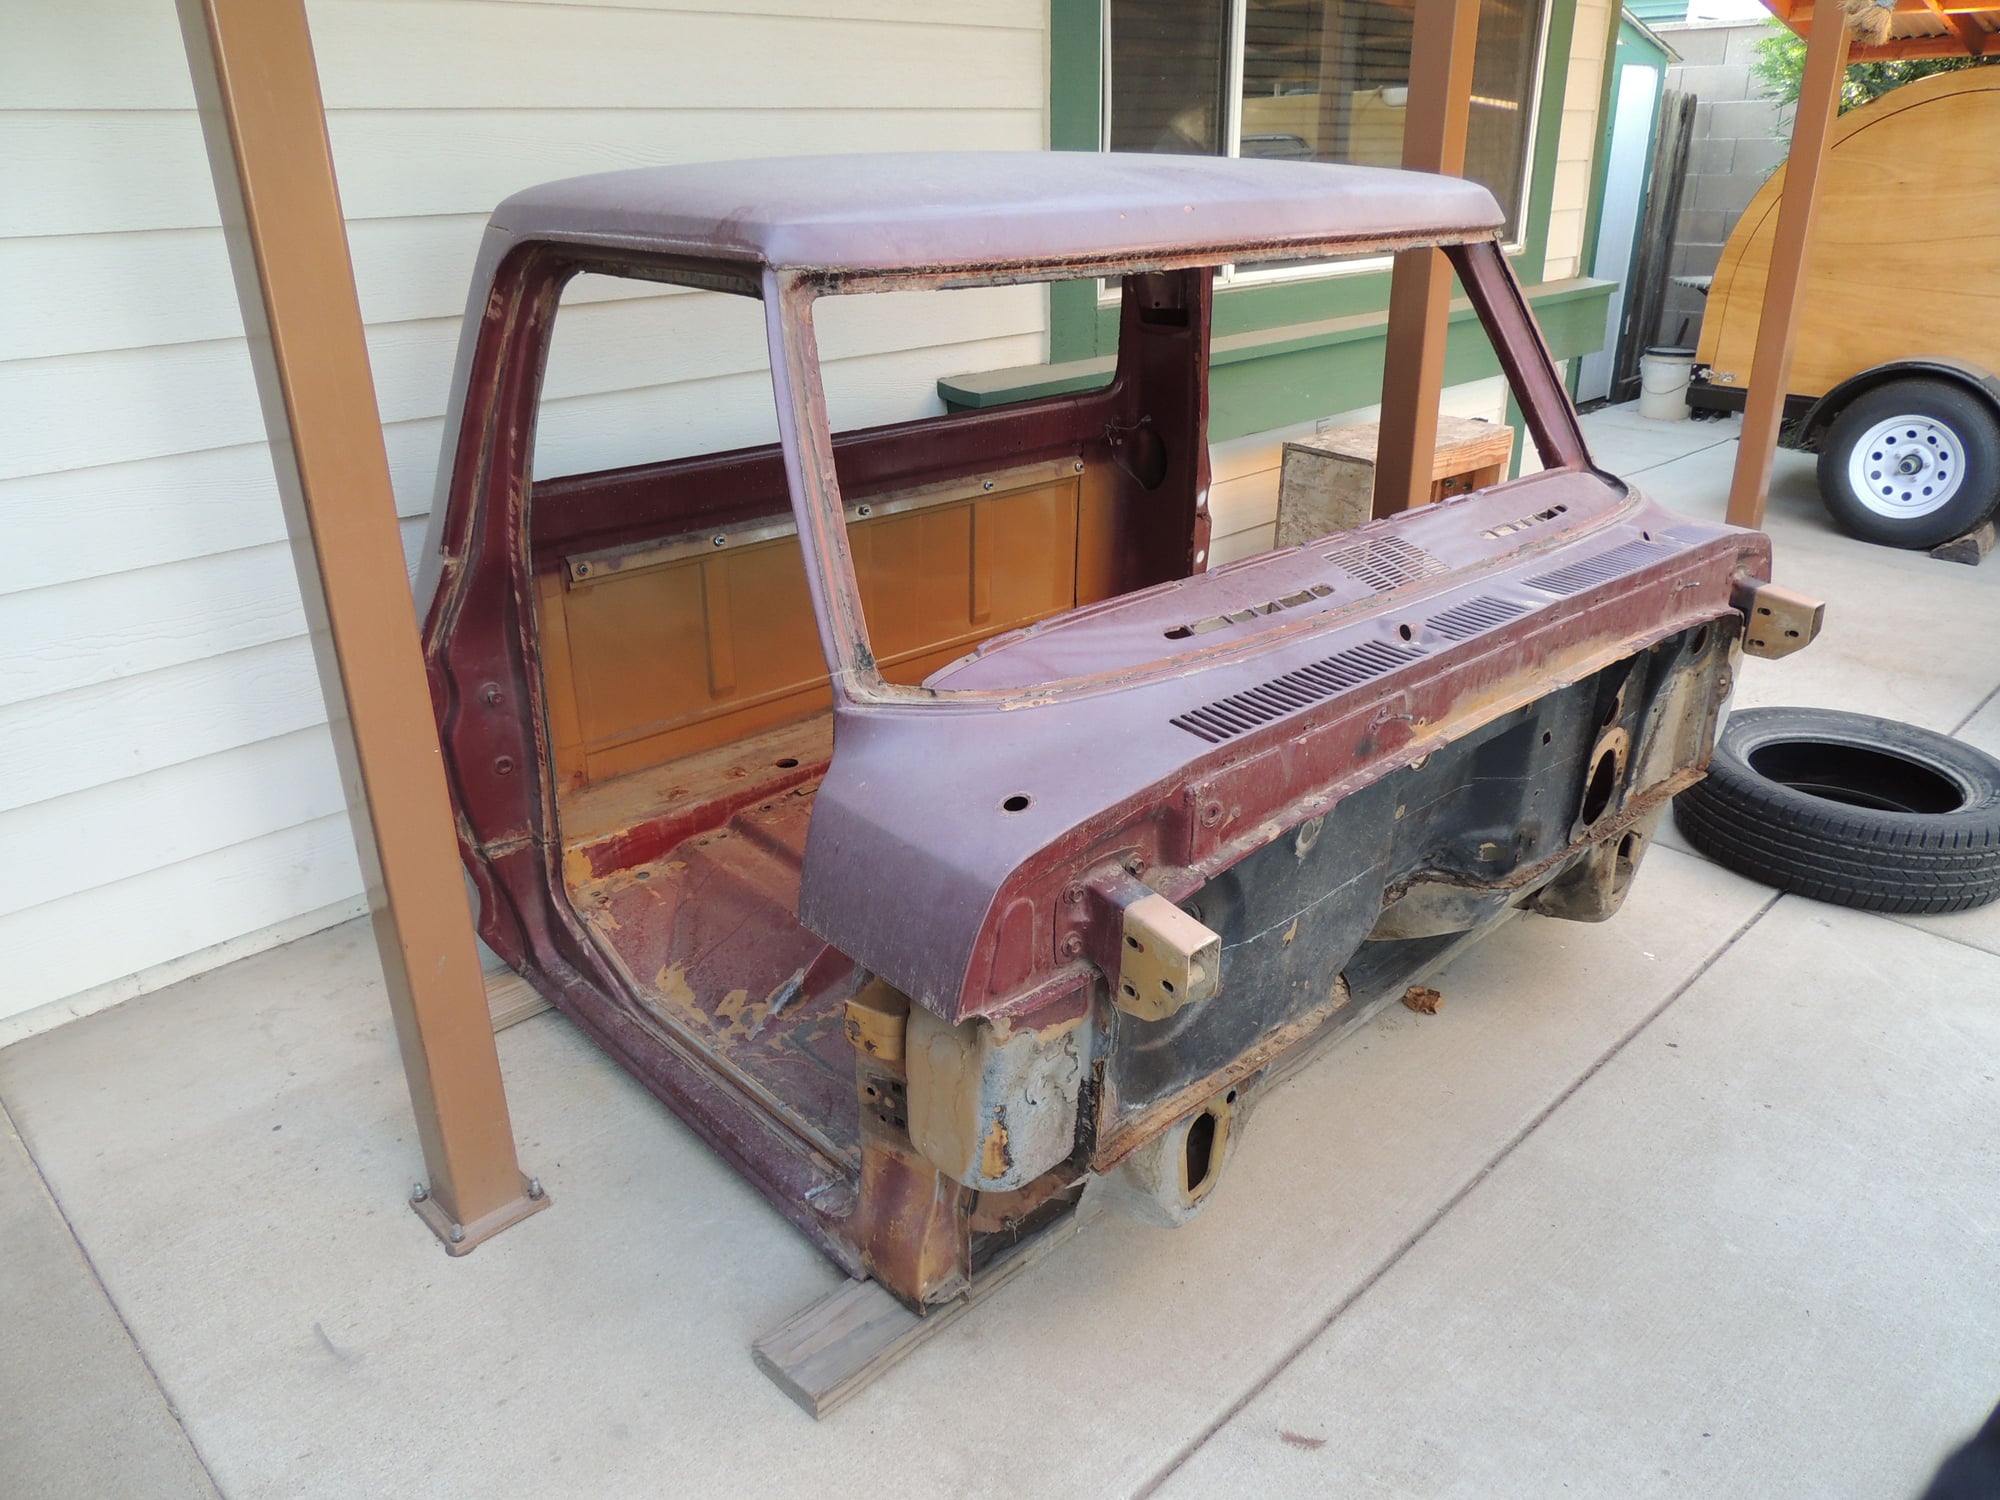 1976 Ford F-100 - Do you like to build models? Full rig torn down to the frame ready for prep, paint and assembly! - Used - VIN Ford F100 360 - 150,000 Miles - 8 cyl - 4WD - Manual - Truck - Purple - Yuba City, CA 95993, United States